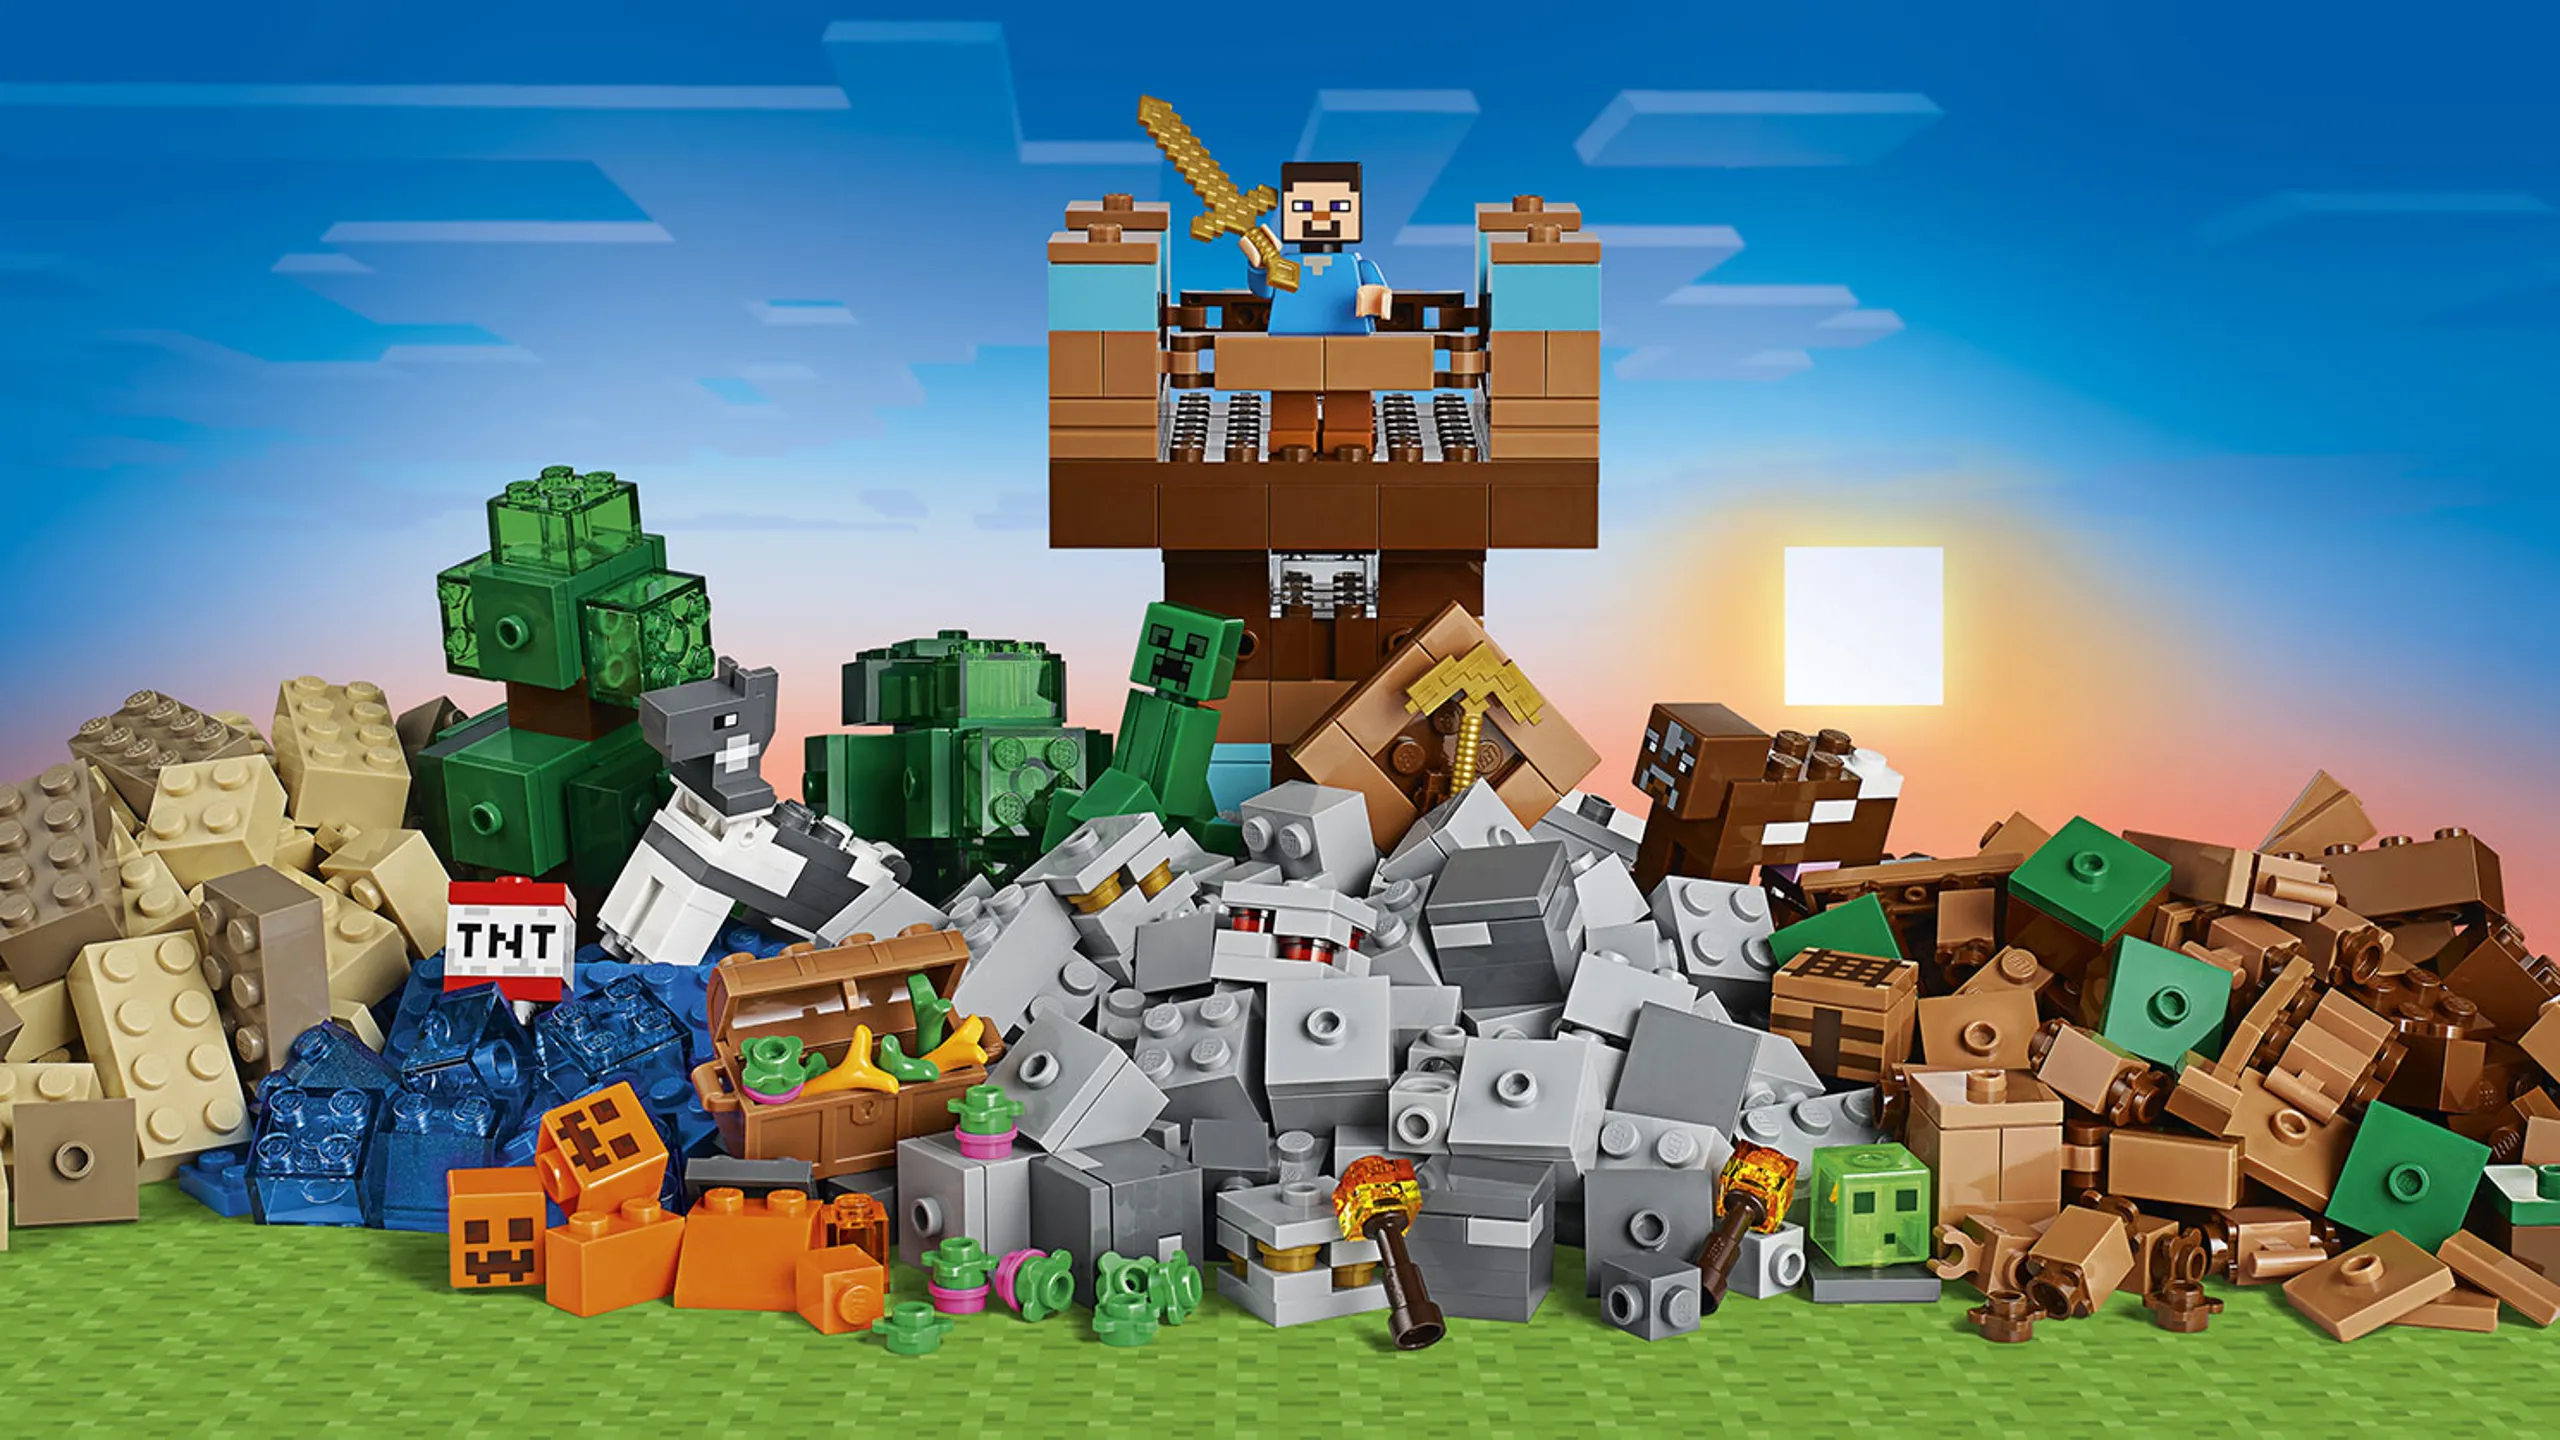 LEGO Minecraft - 21135 The Crafting Box 2.0 -  Boost your creativity and create your own customized Minecraft™ landscapes with shelters, towers, mines and farms with this big Crafting Box!